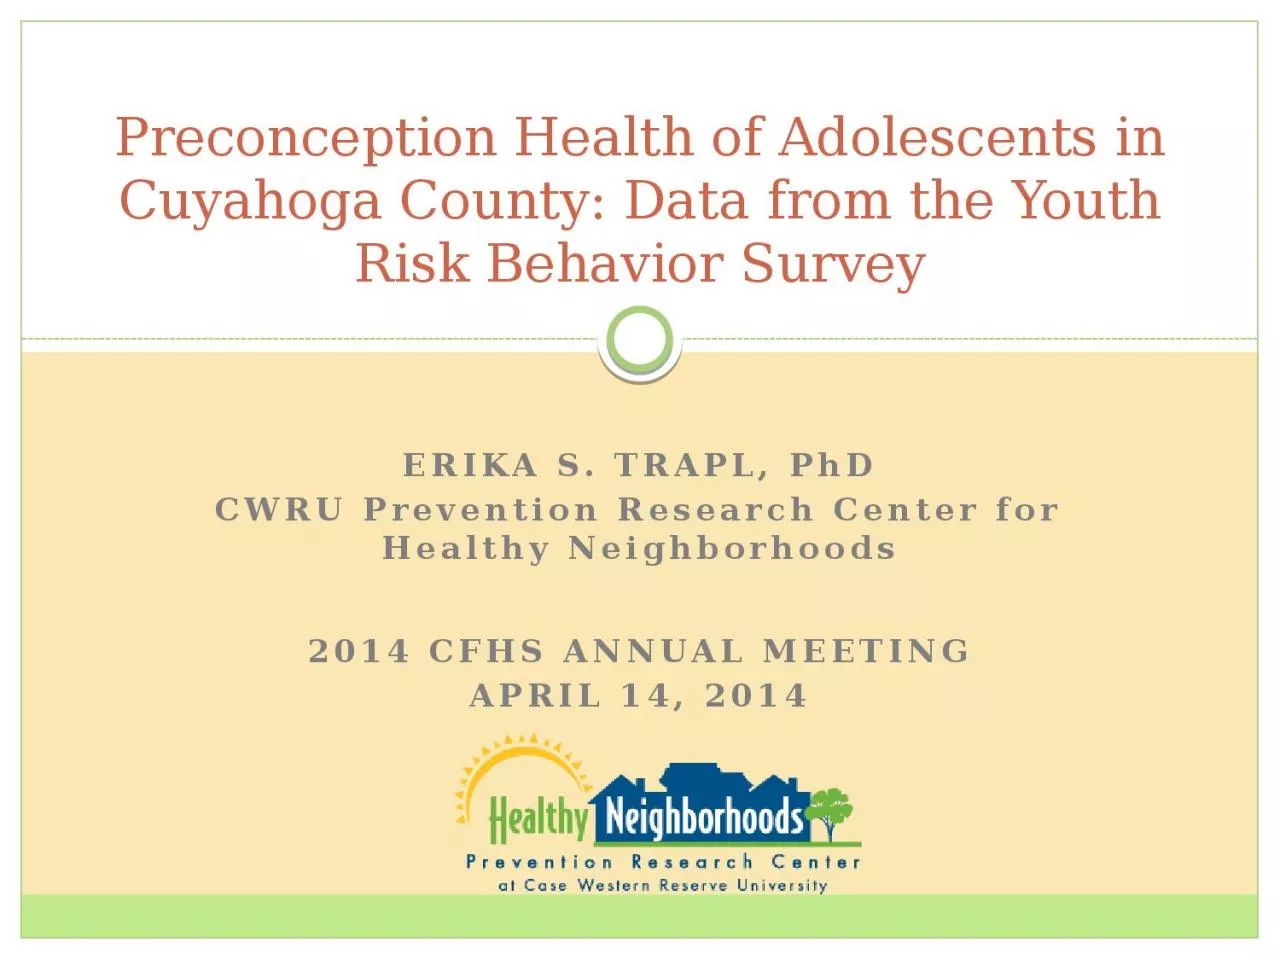 Preconception Health of Adolescents in Cuyahoga County: Data from the Youth Risk Behavior